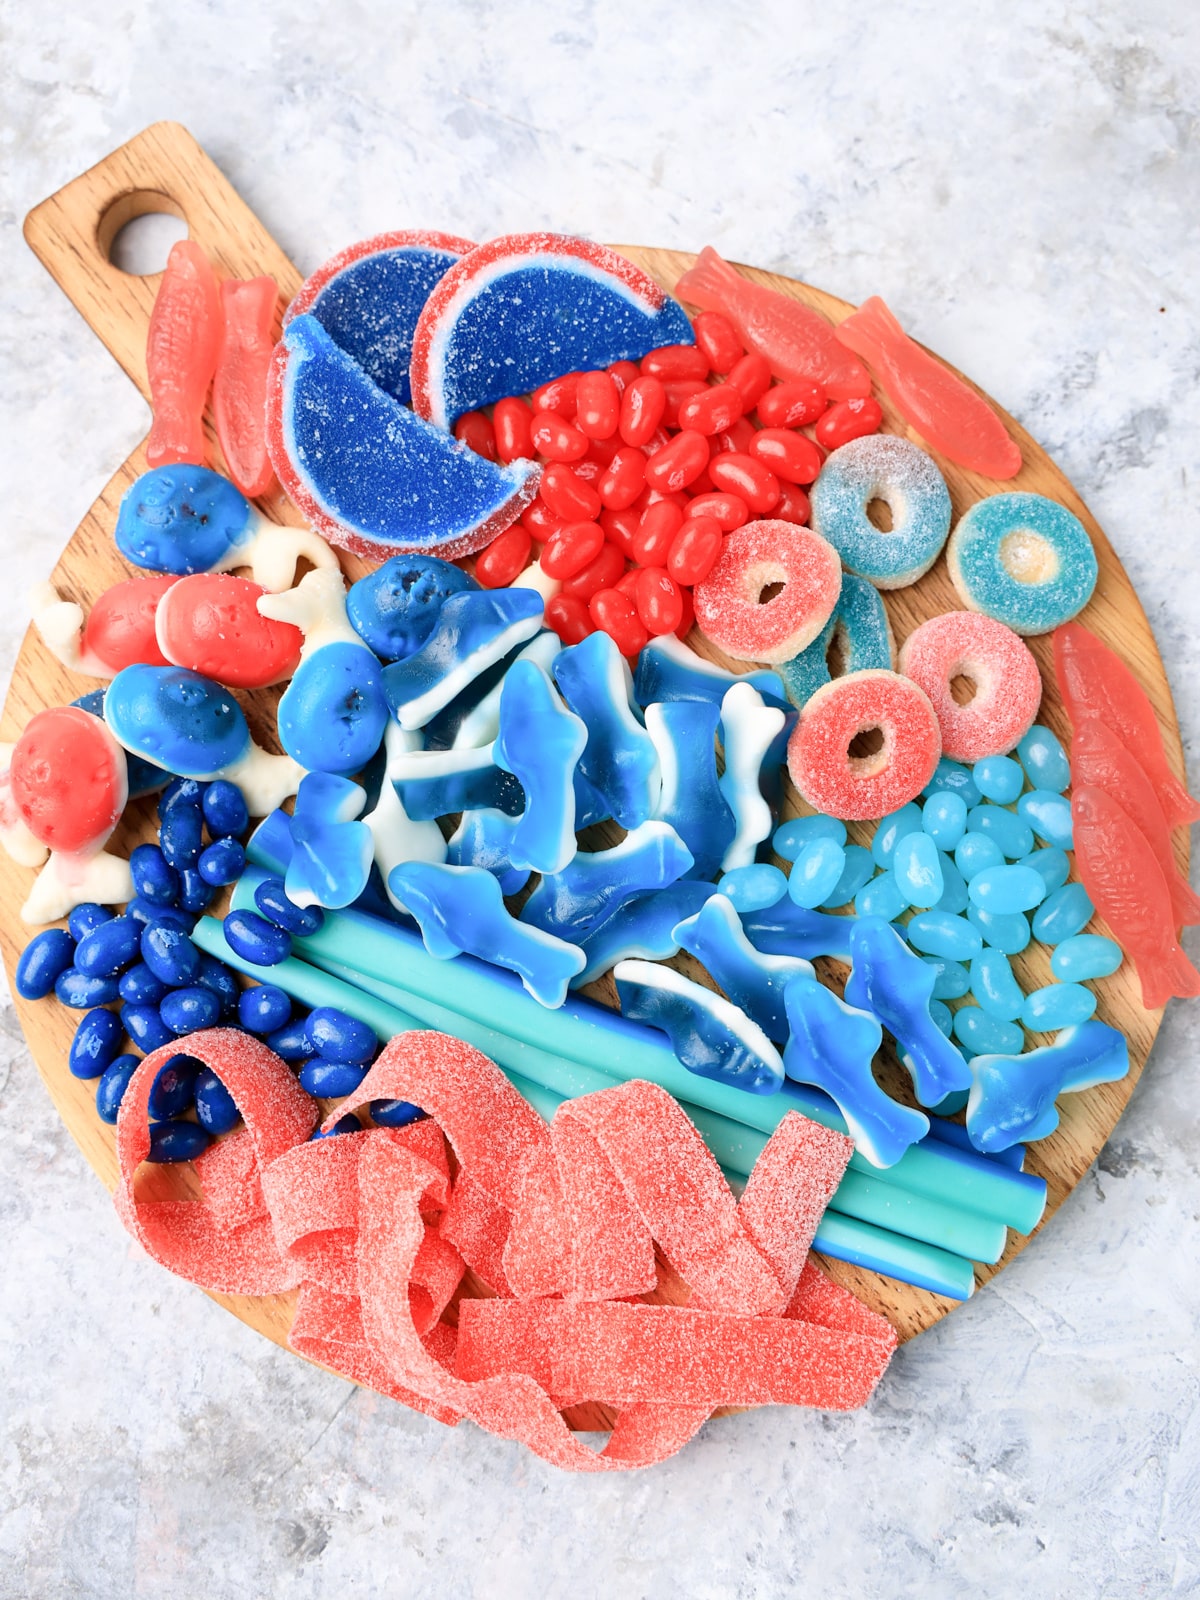 shark and fish candy bar on a wooden cutting board.